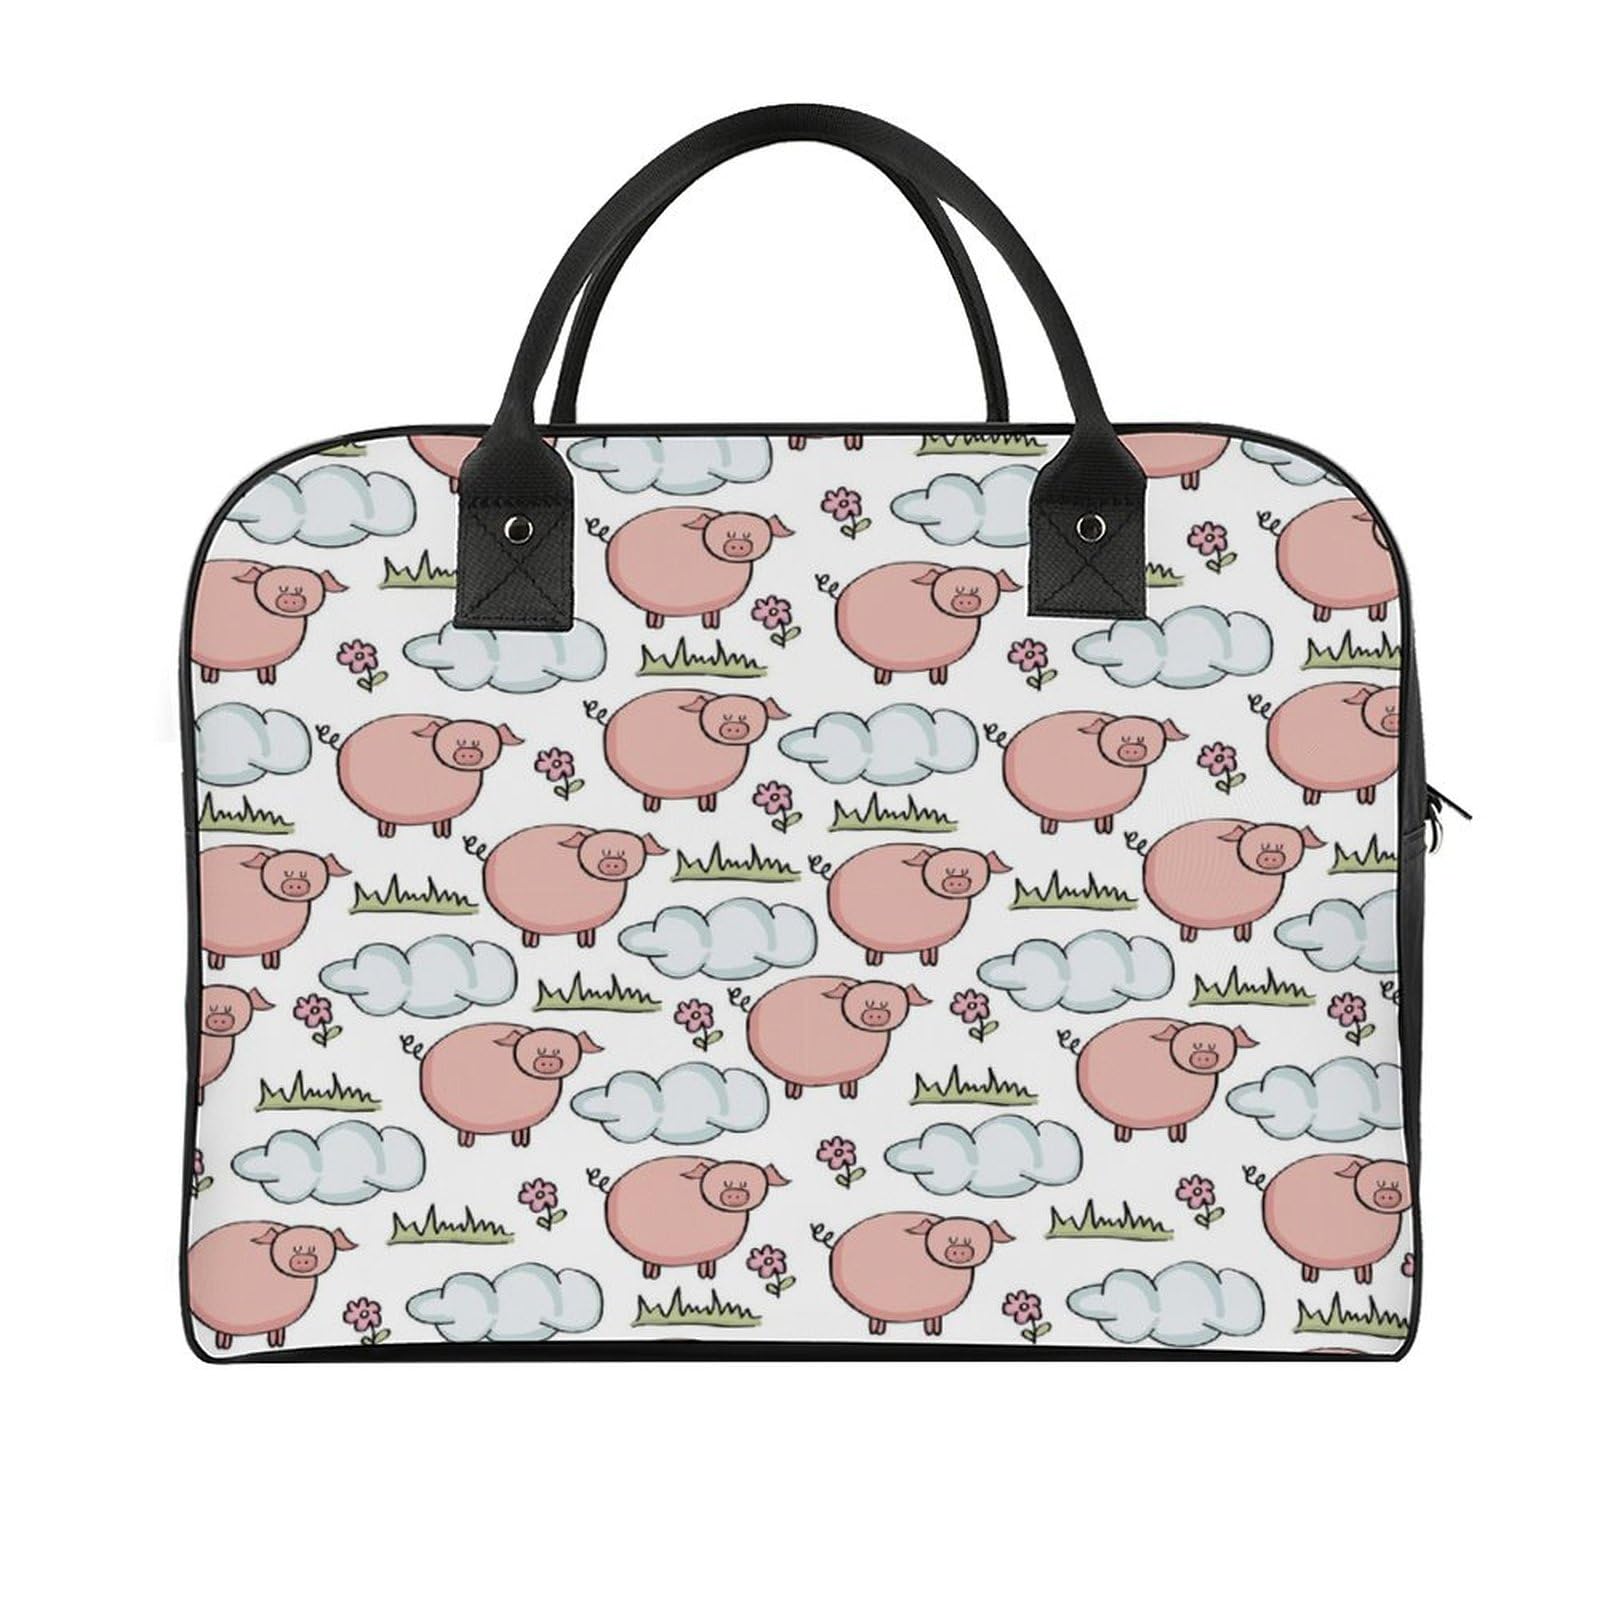 Doodle Pigs Pattern Large Crossbody Bag Laptop Bags Shoulder Handbags Tote with Strap for Travel Office